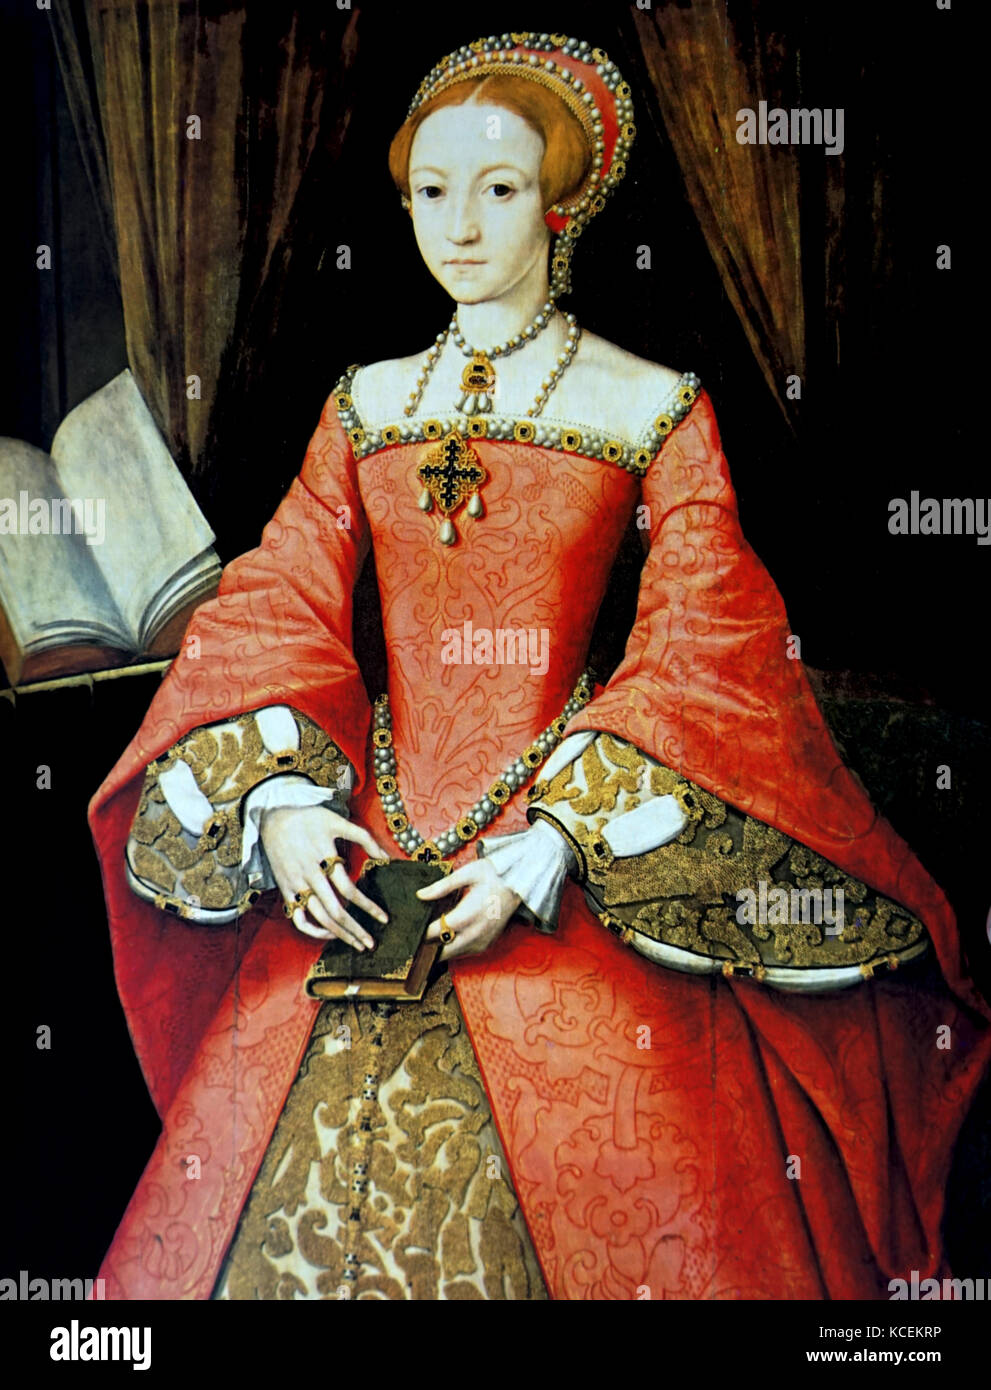 Portrait of a young Queen Elizabeth I of England (1533-1603) the last monarch of the Tudor Dynasty. Dated 16th Century Stock Photo